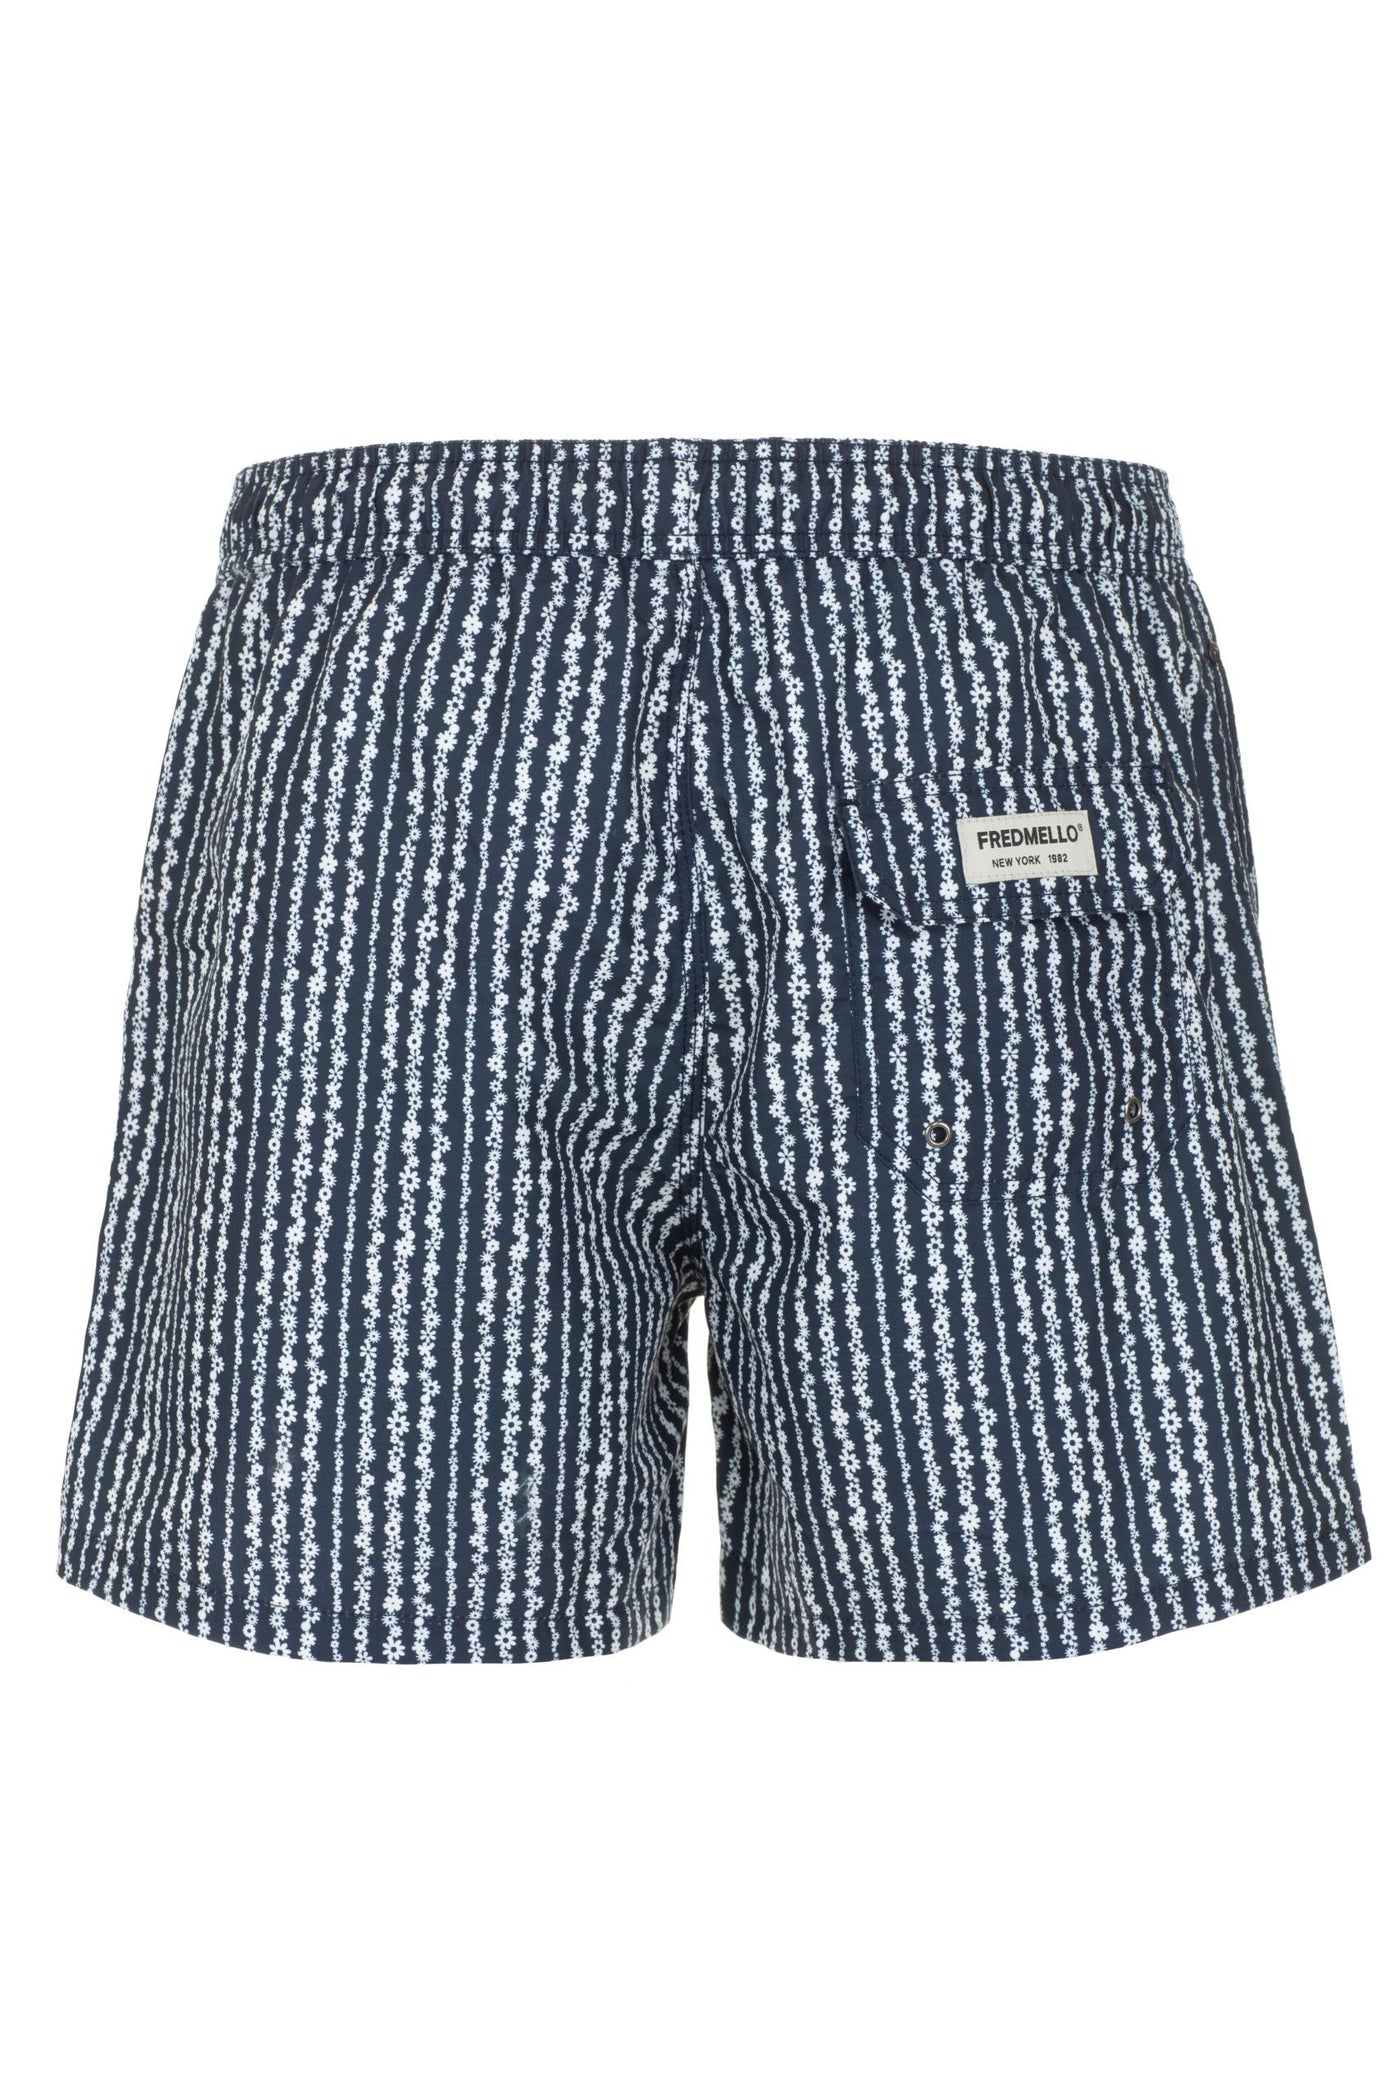 Fred Mello Trendy Oceanic Blue Beach Shorts with Logo Embroidery